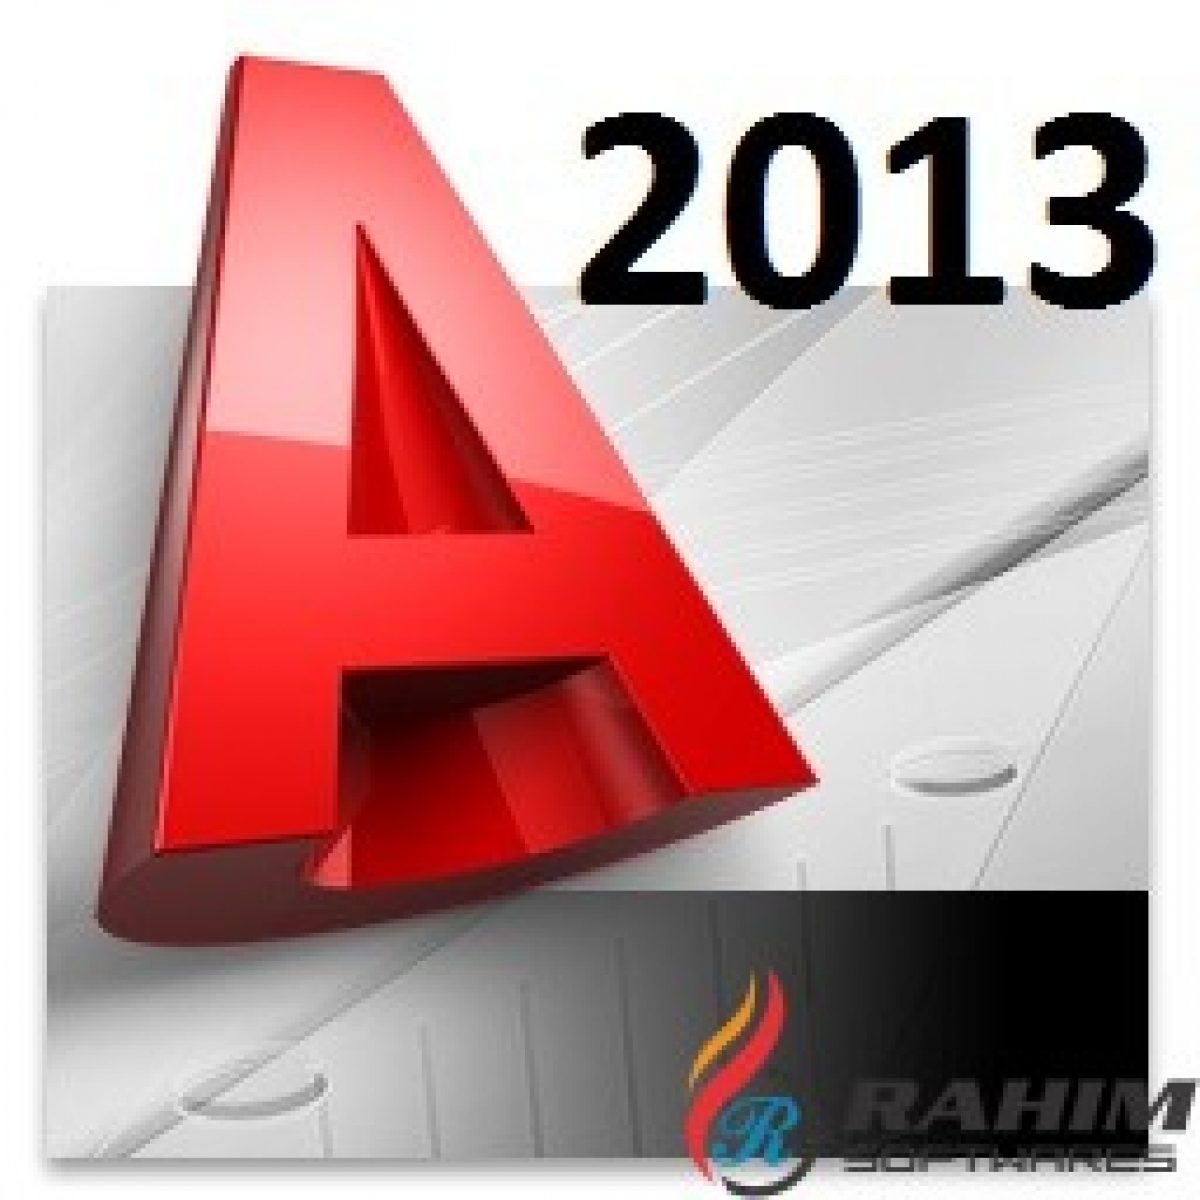 Autocad 2013 with crack for windows 7 32 bit torrent iso